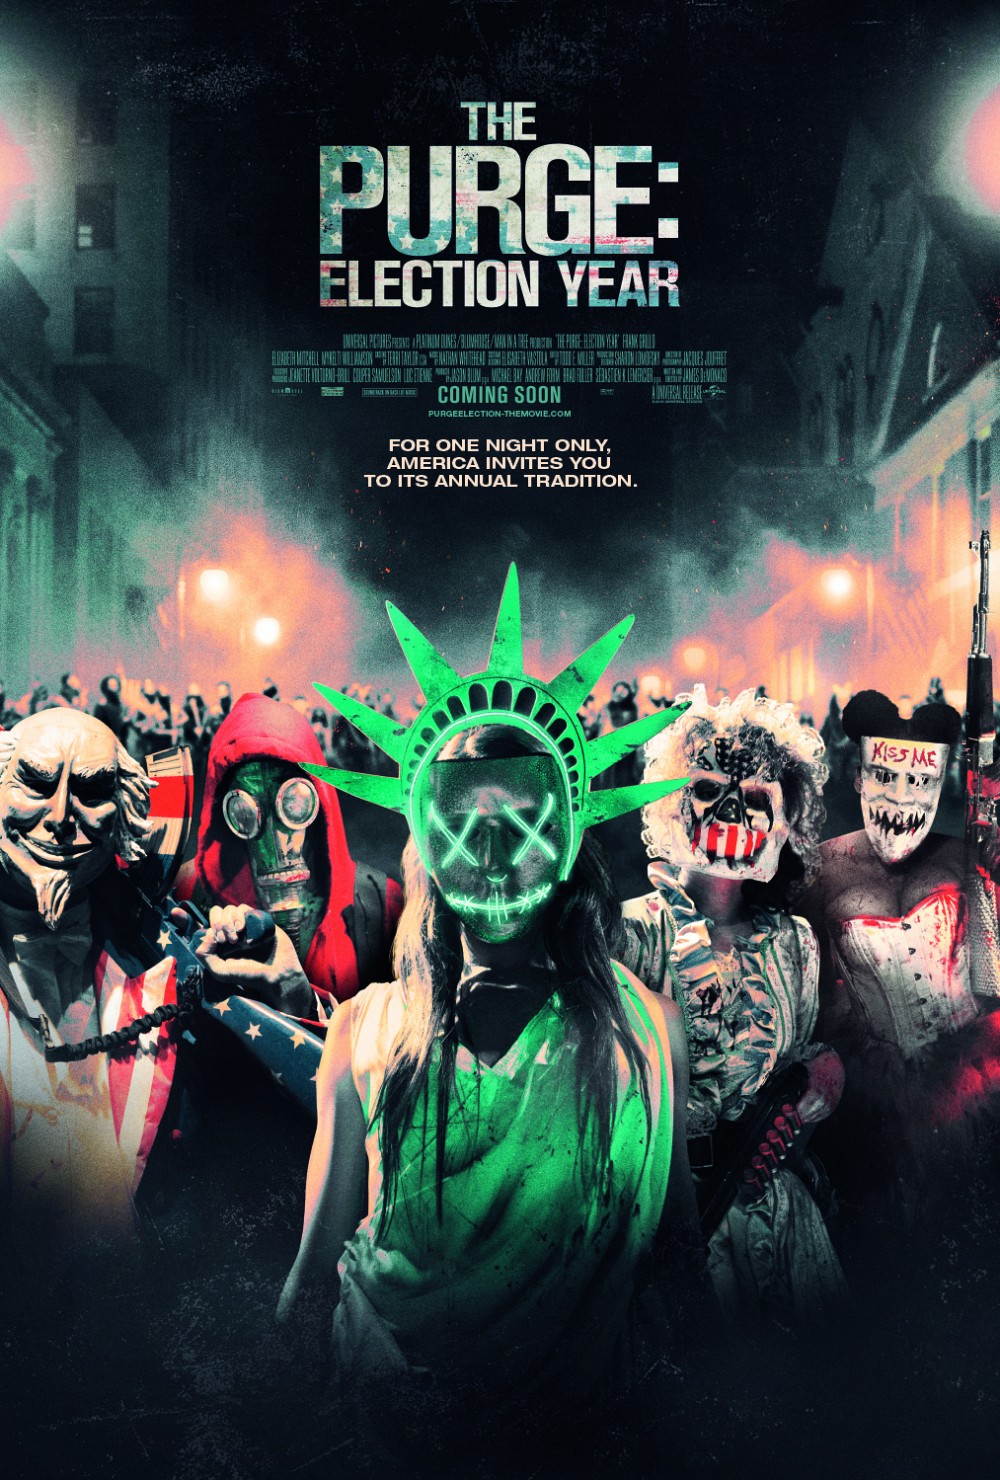  The Purge: Election Year U.K. movie poster